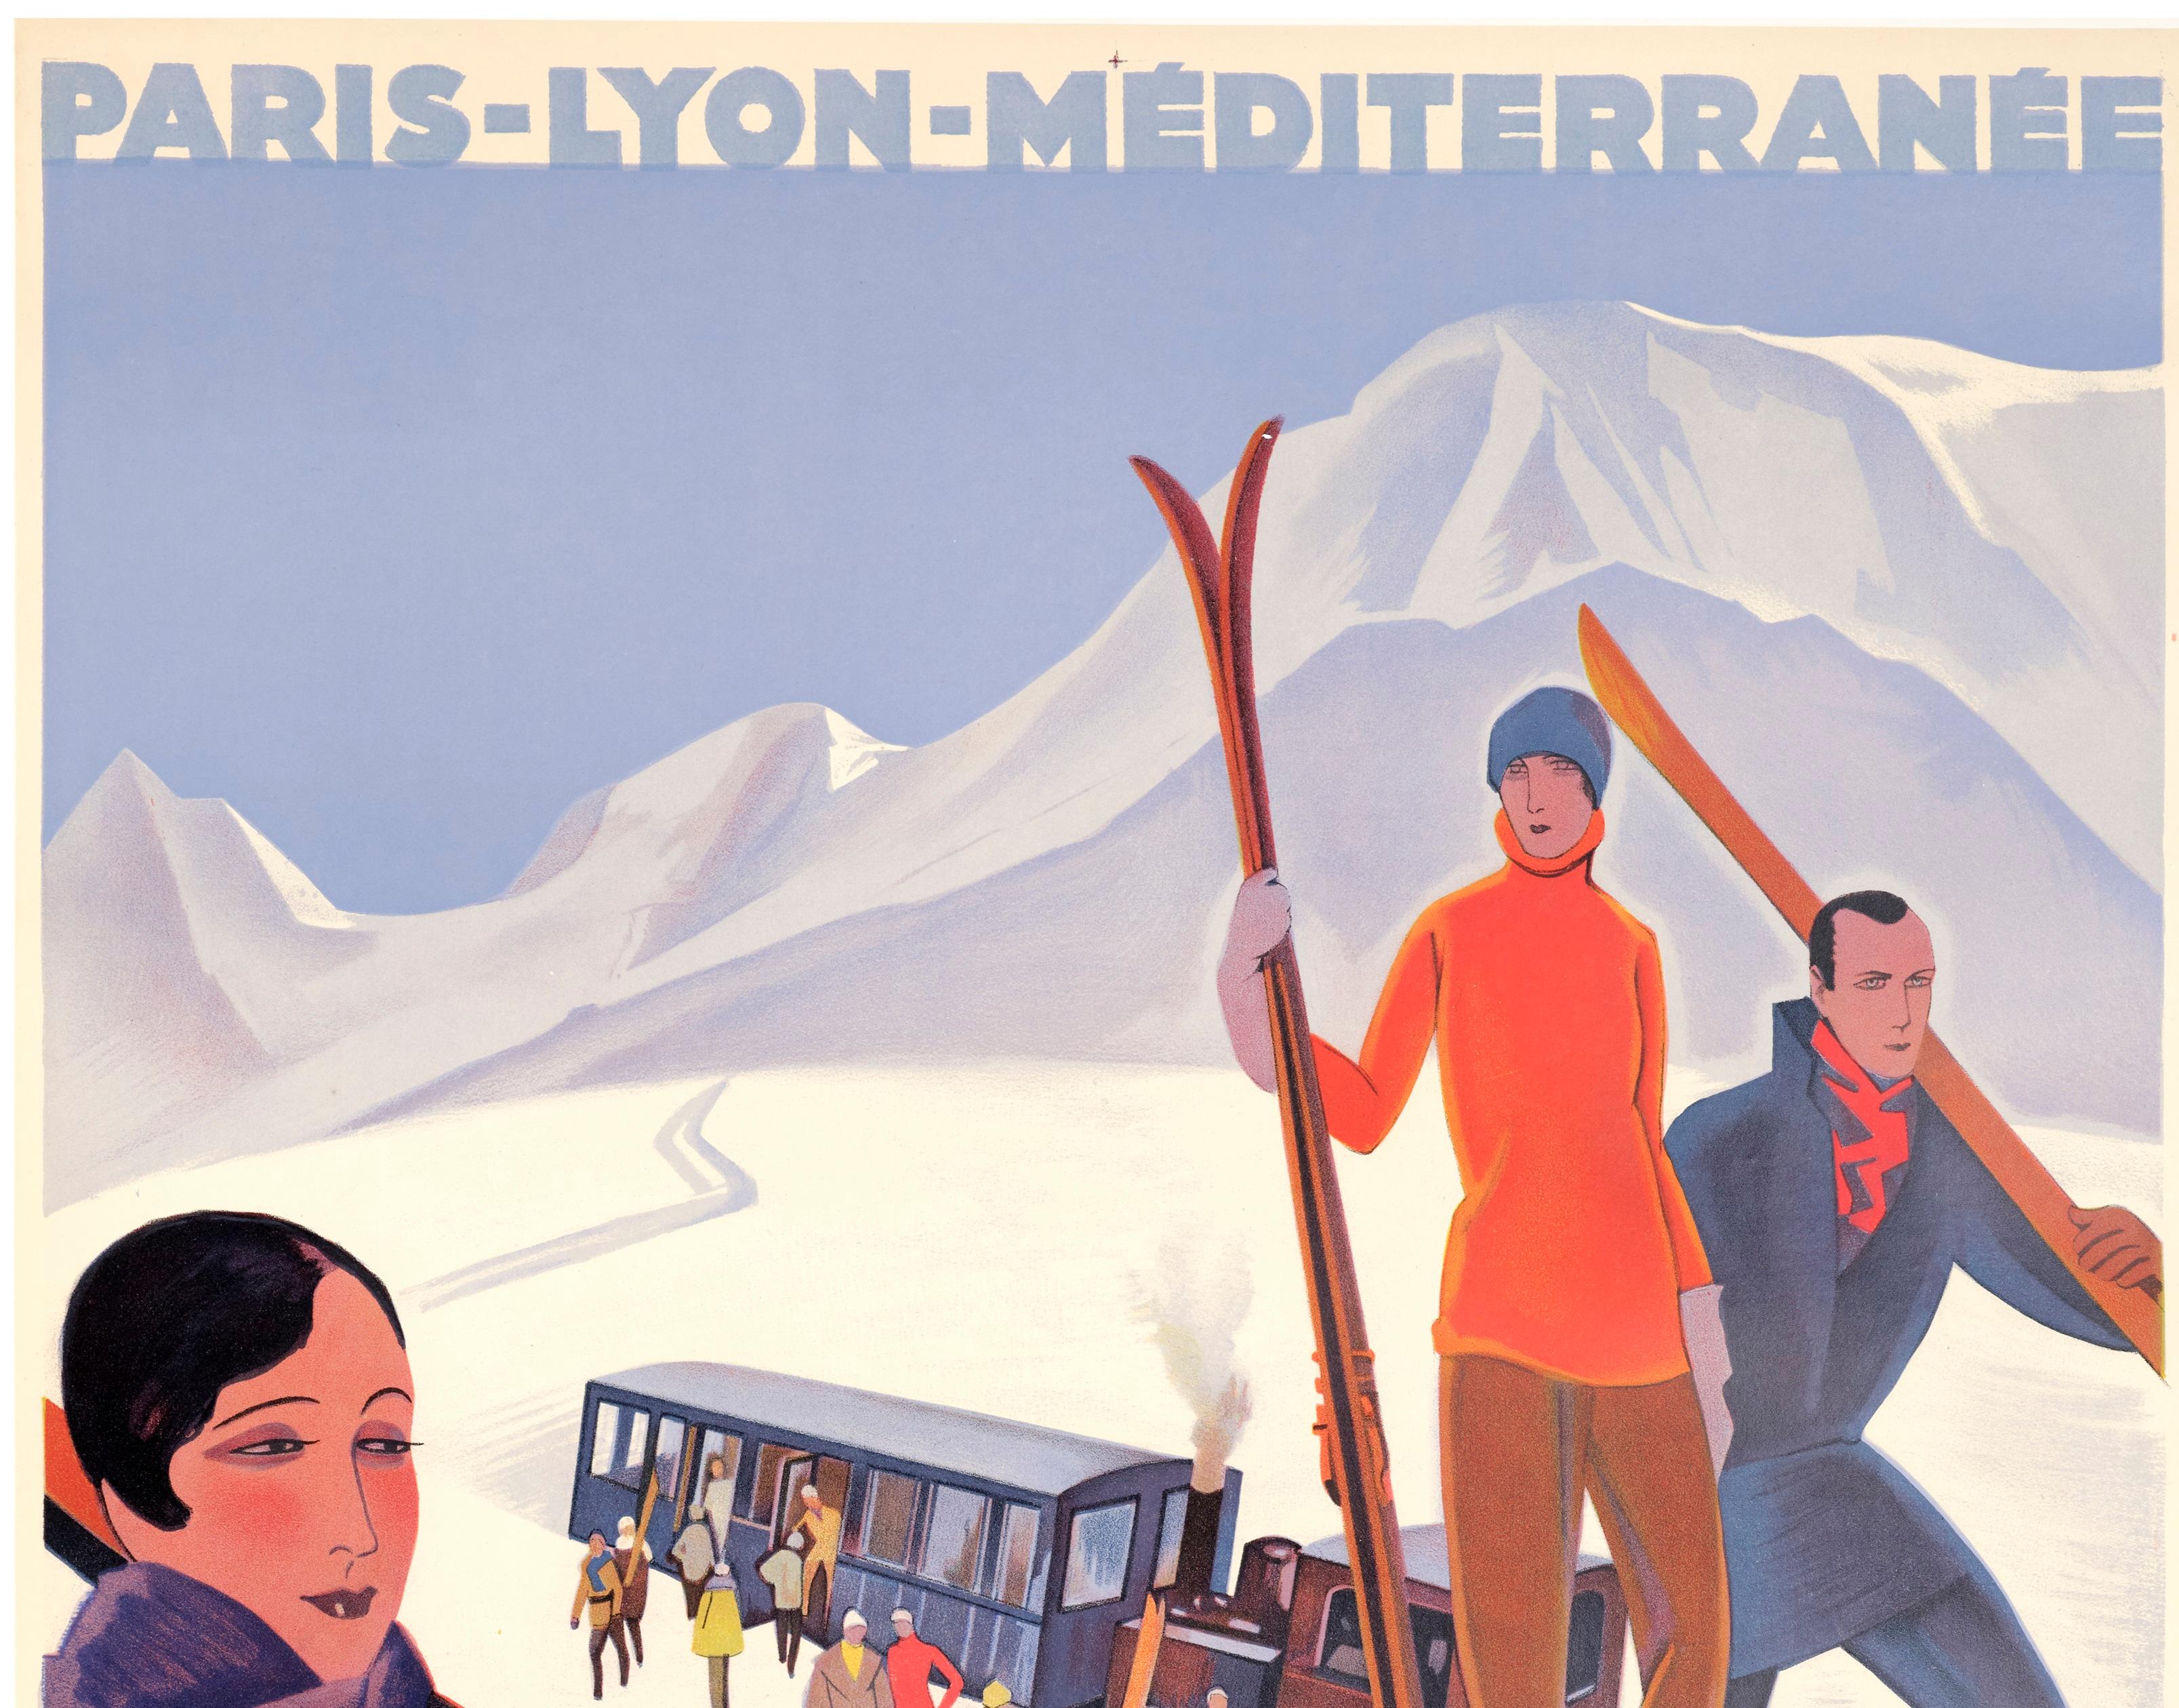 P.L.M. (Paris-Lyon-Mediterranean) poster produced by Roger Broders in 1929 to promote winter sports in the Alps.

Artist: Roger Broders (1883-1953)
Title: Winter Sports in the French Alps (Les sports d’hiver dans les Alpes Françaises)
Date: